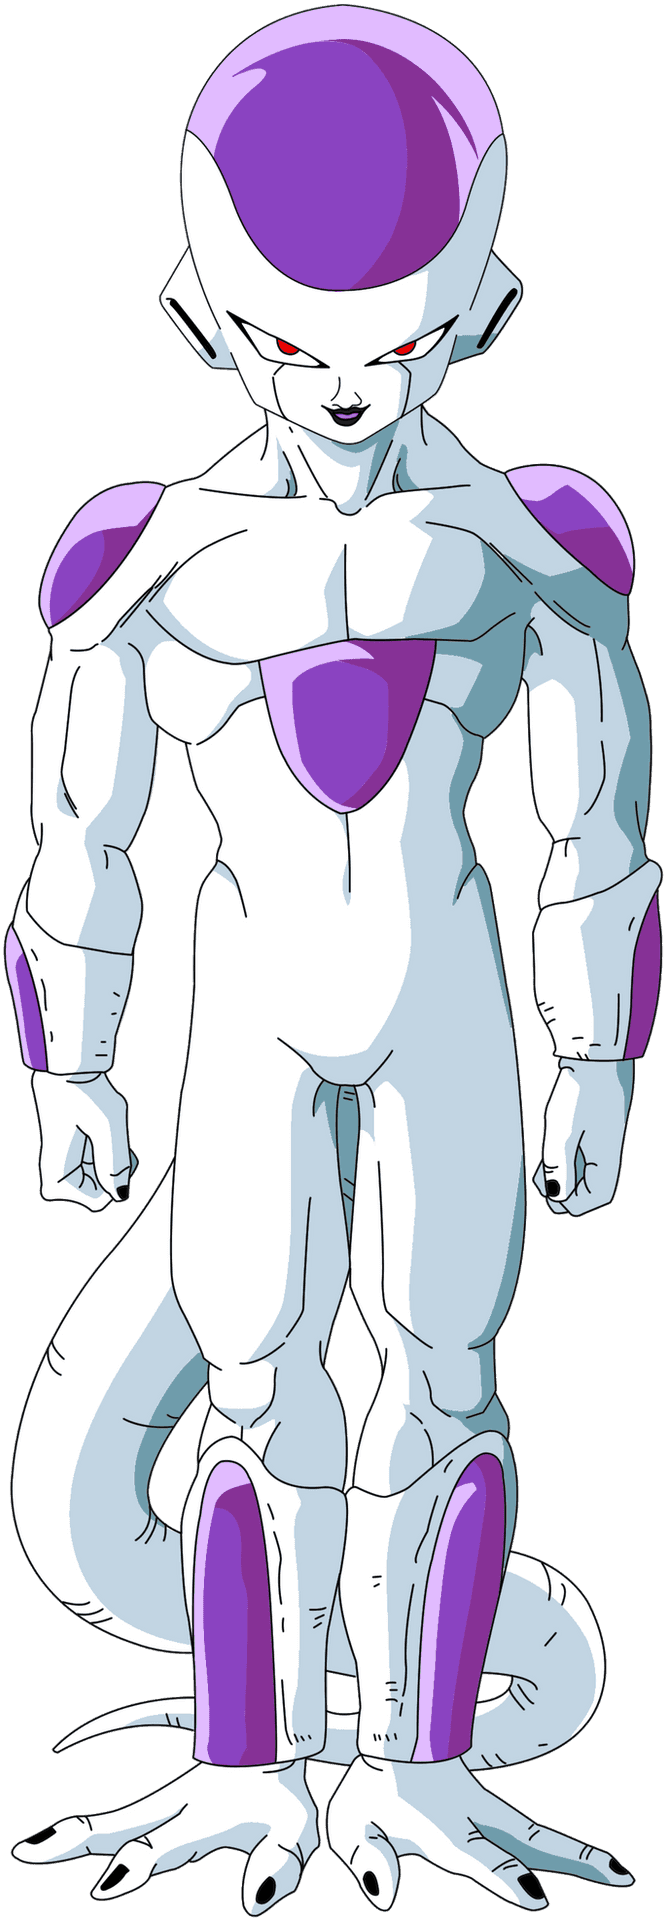 Frieza Standing Pose PNG